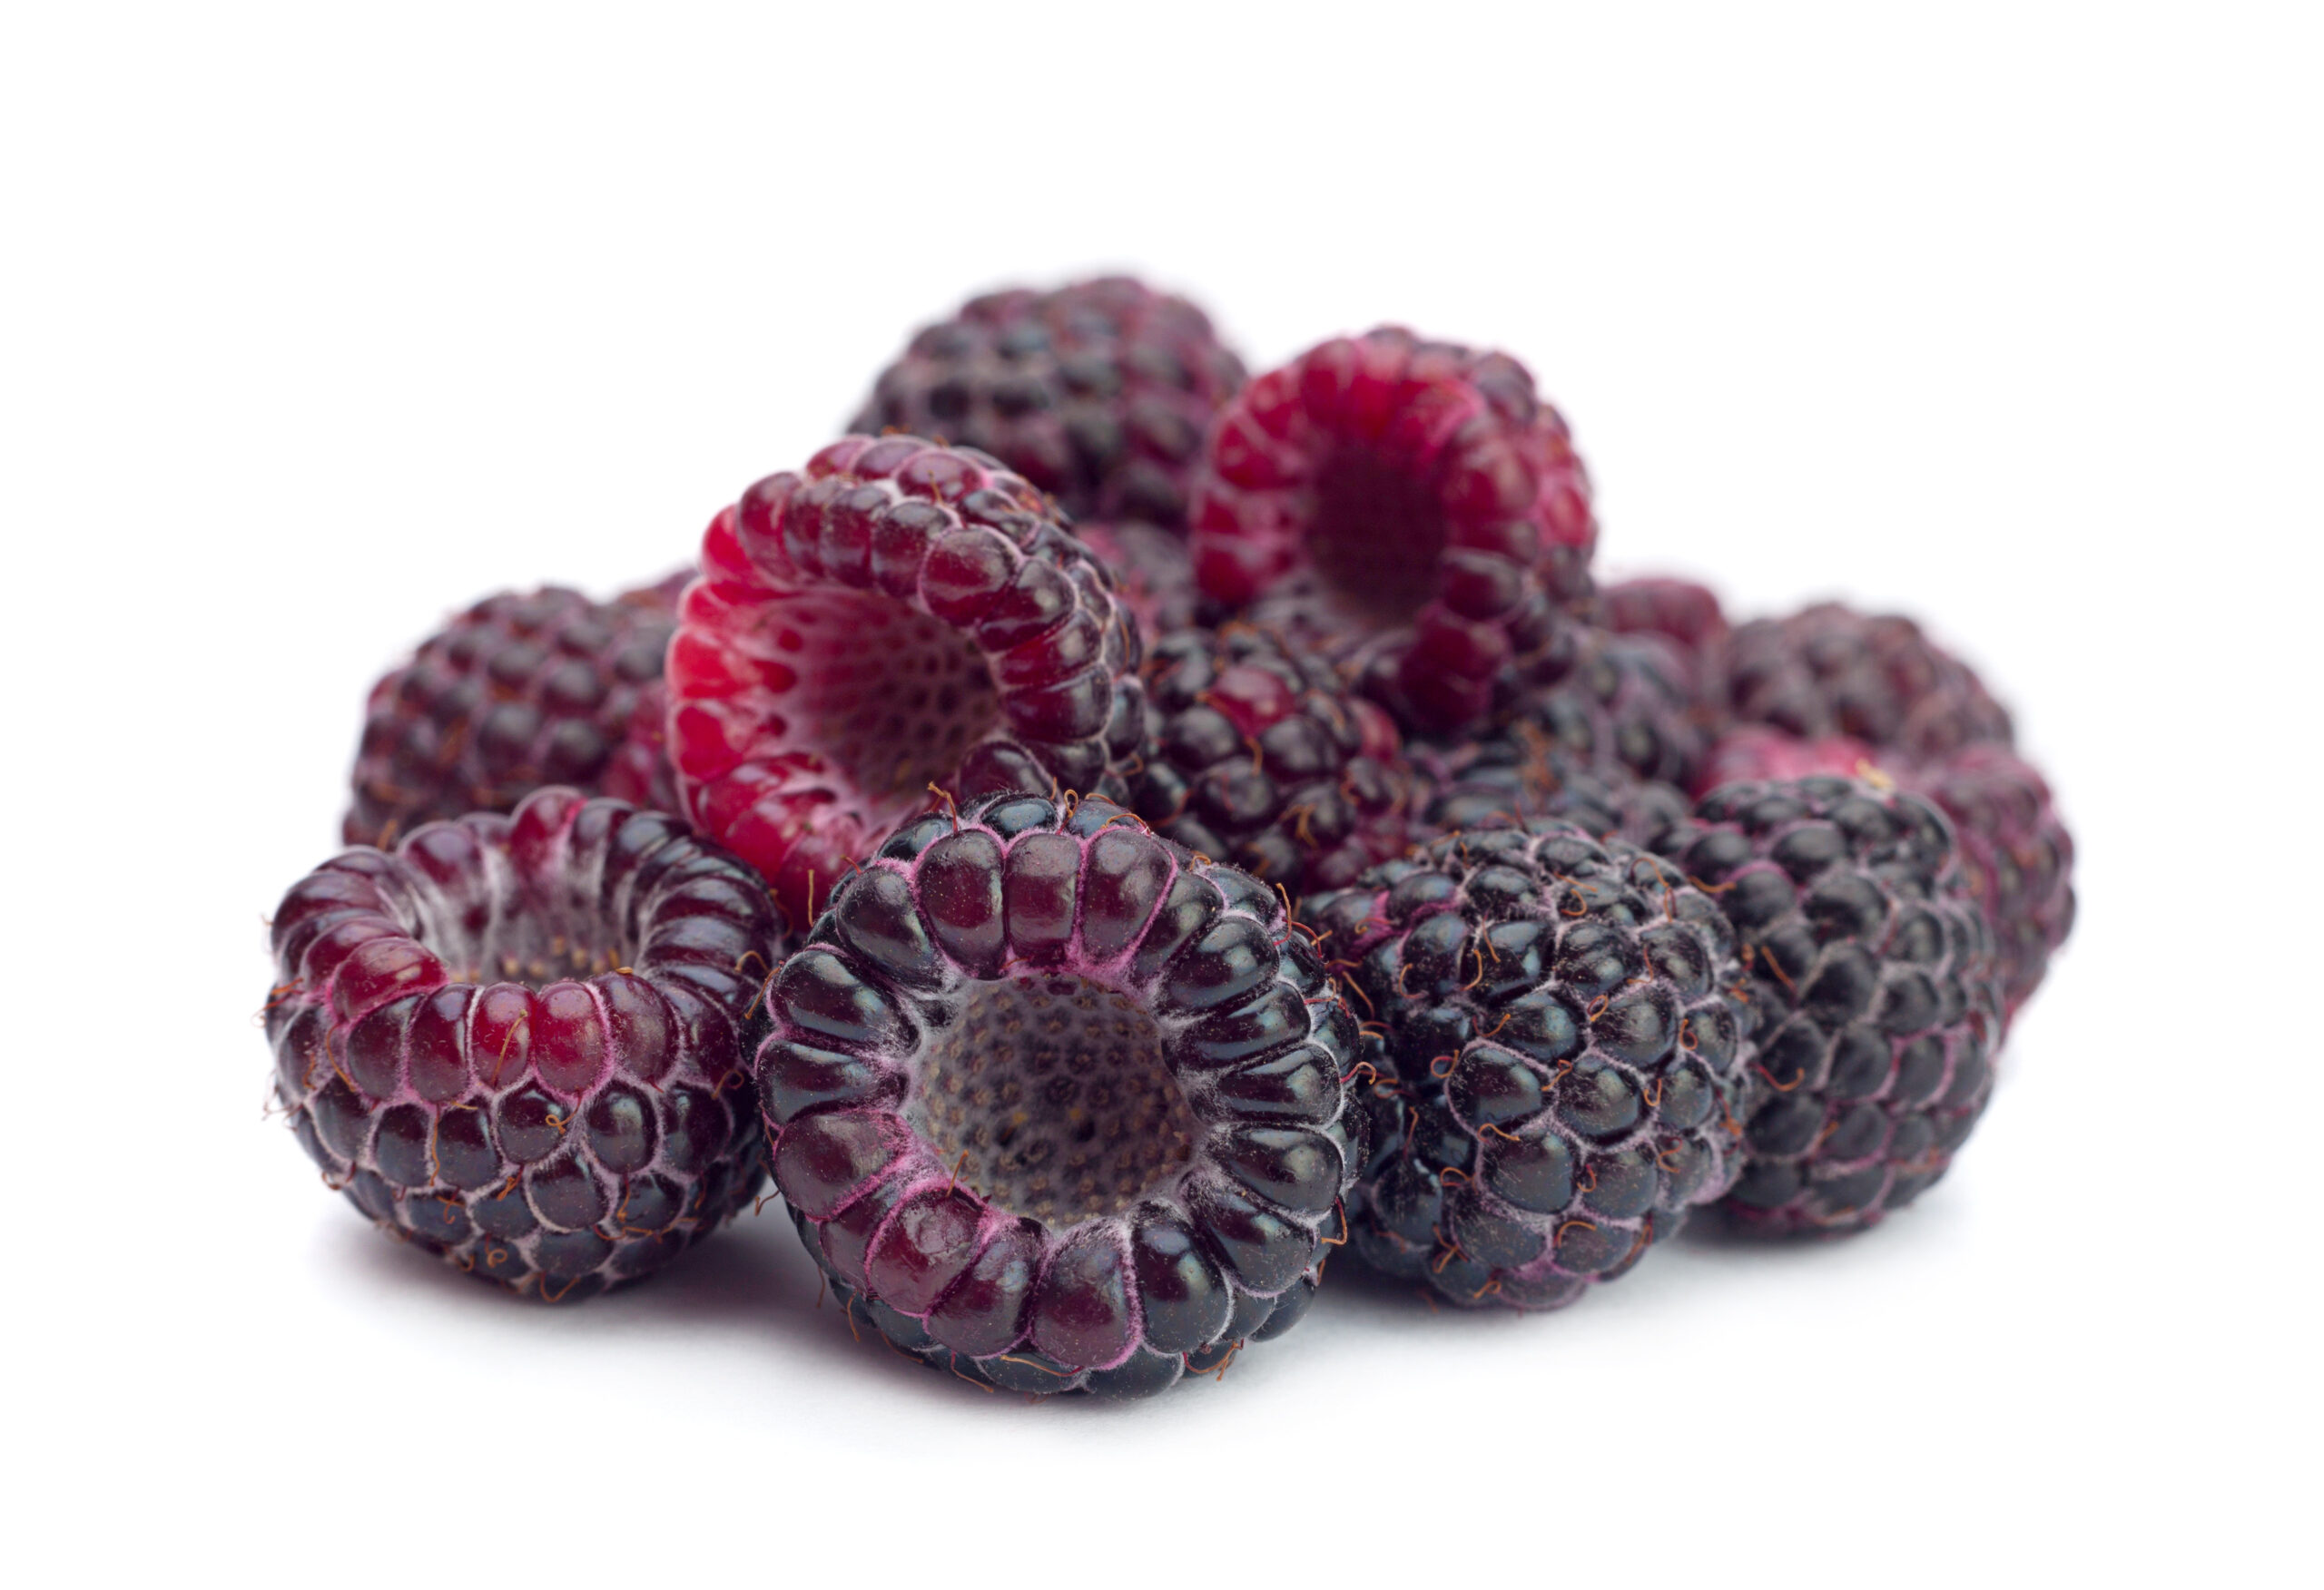 Black raspberries against Alzheimer's, obesity, infections and inflammation